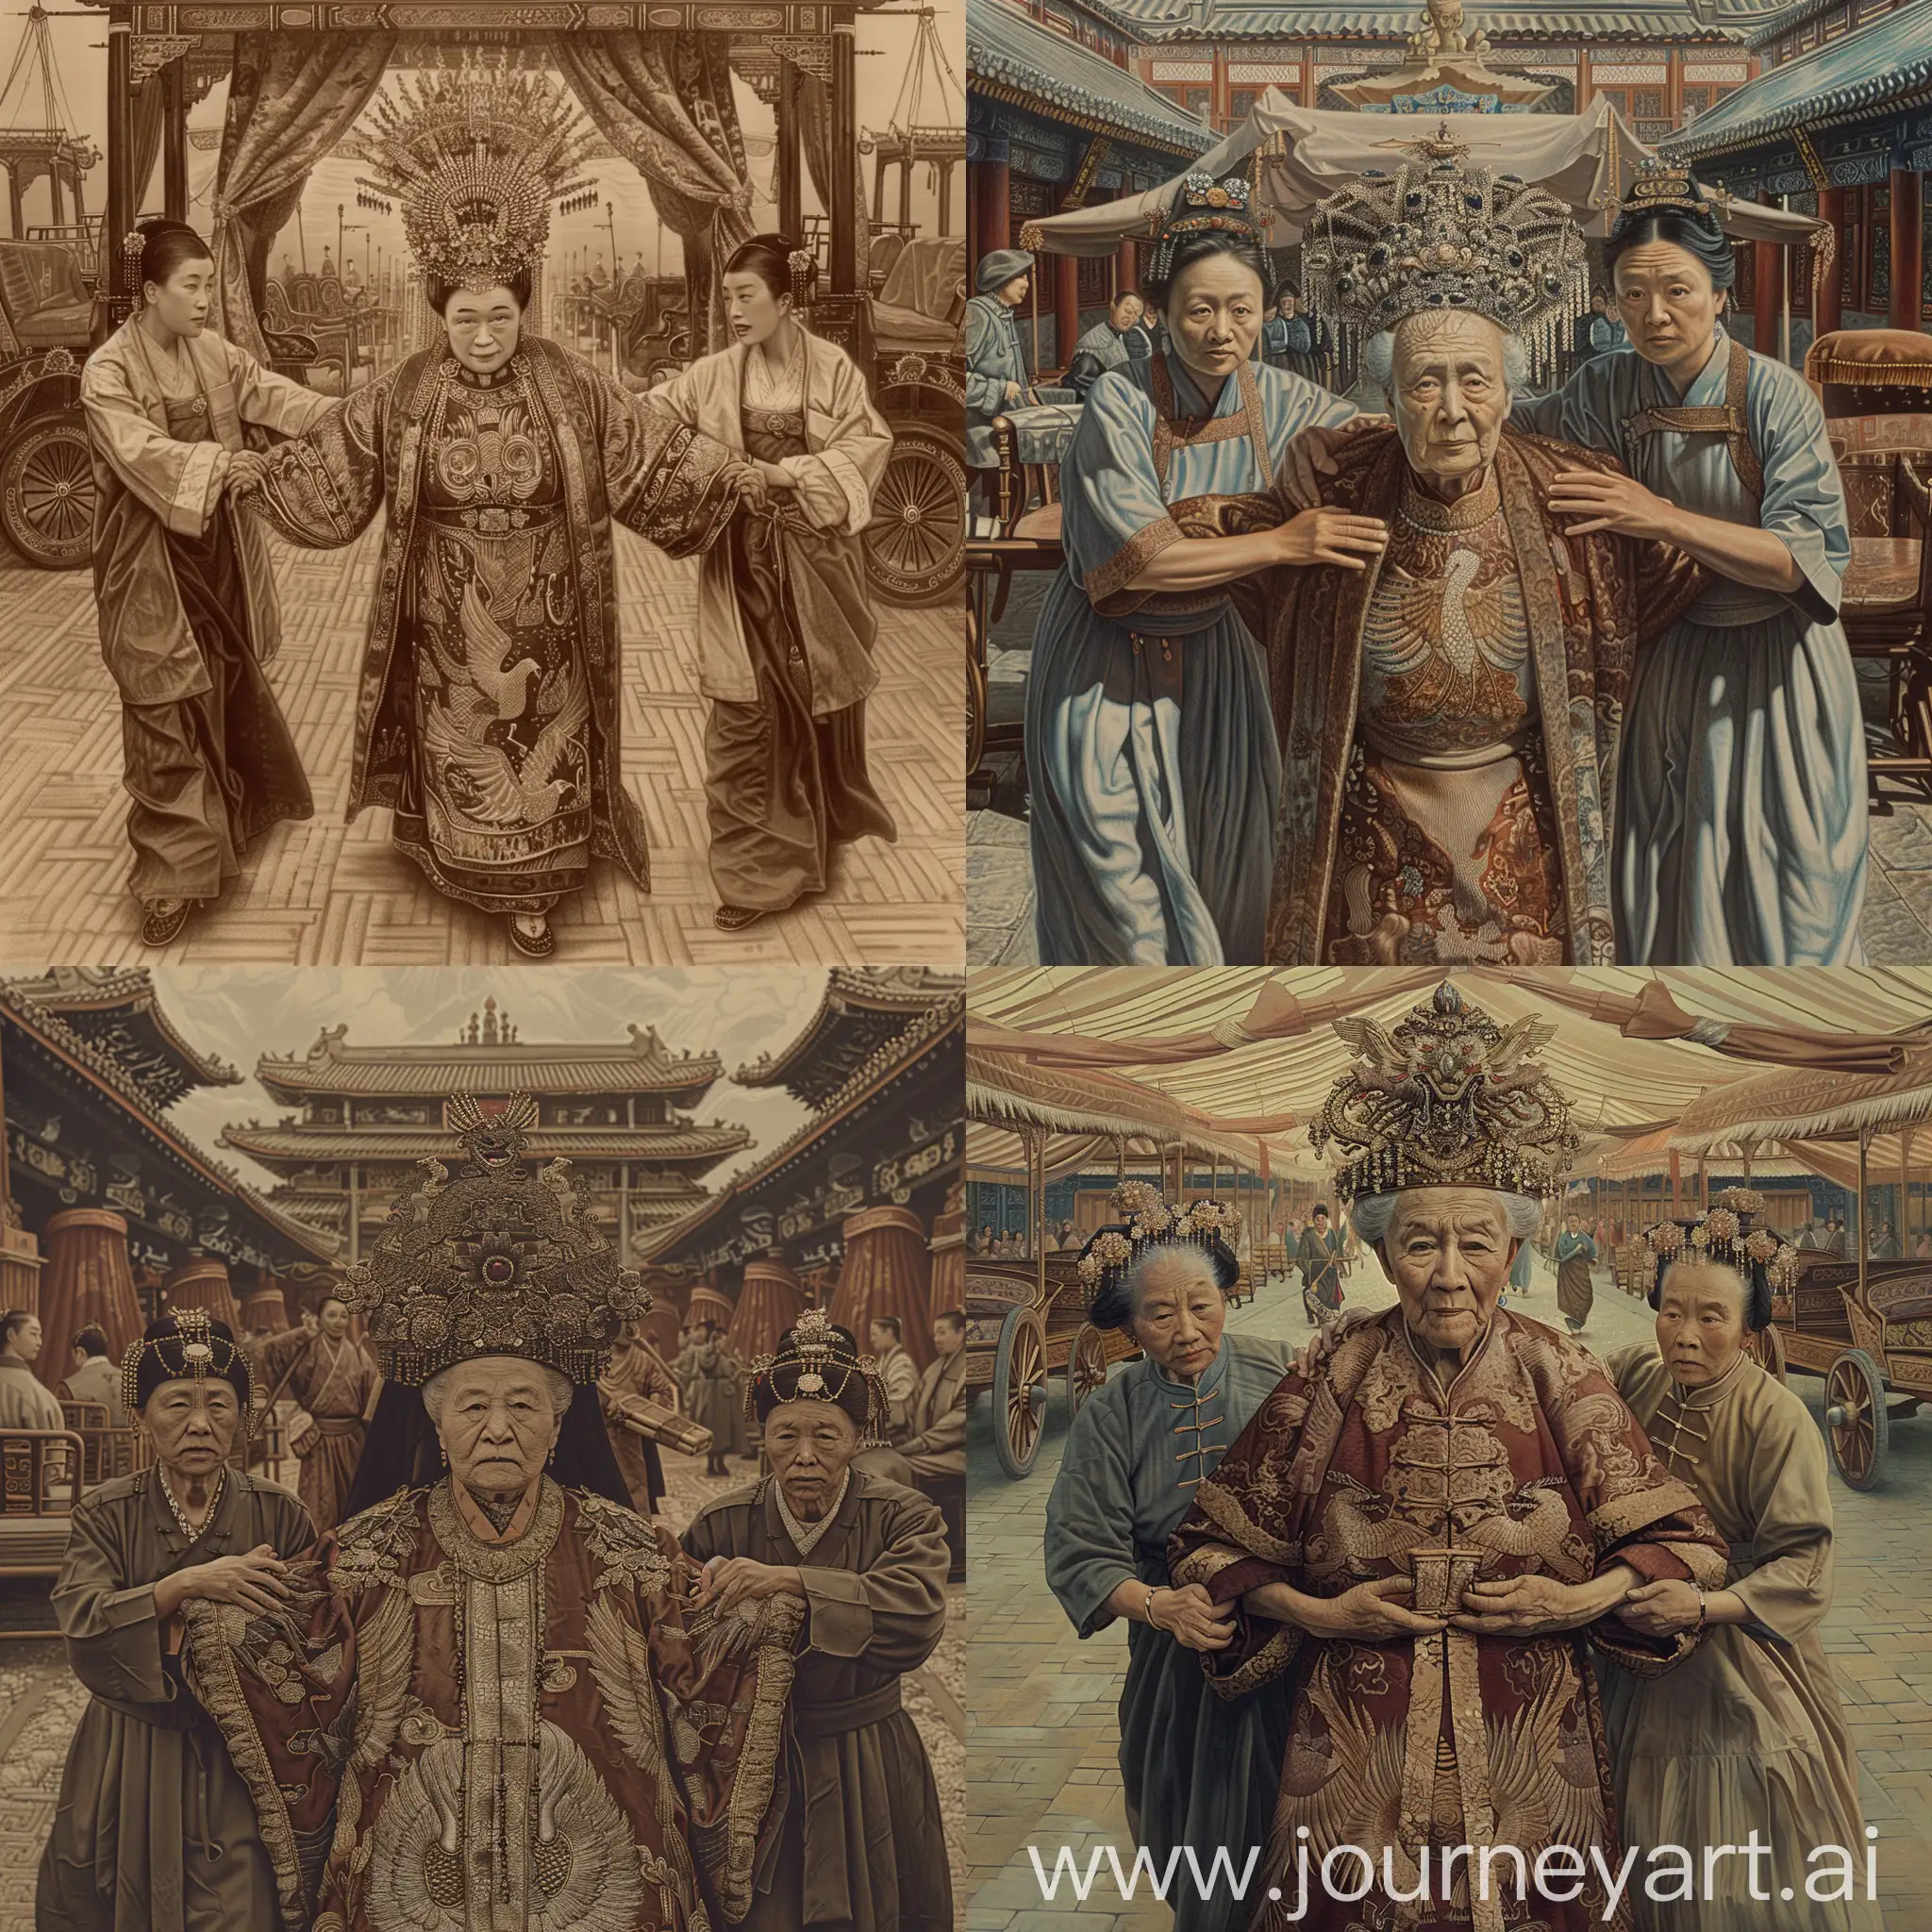 Empress-Dowager-Cixi-Supported-by-Maids-in-Magnificent-Procession